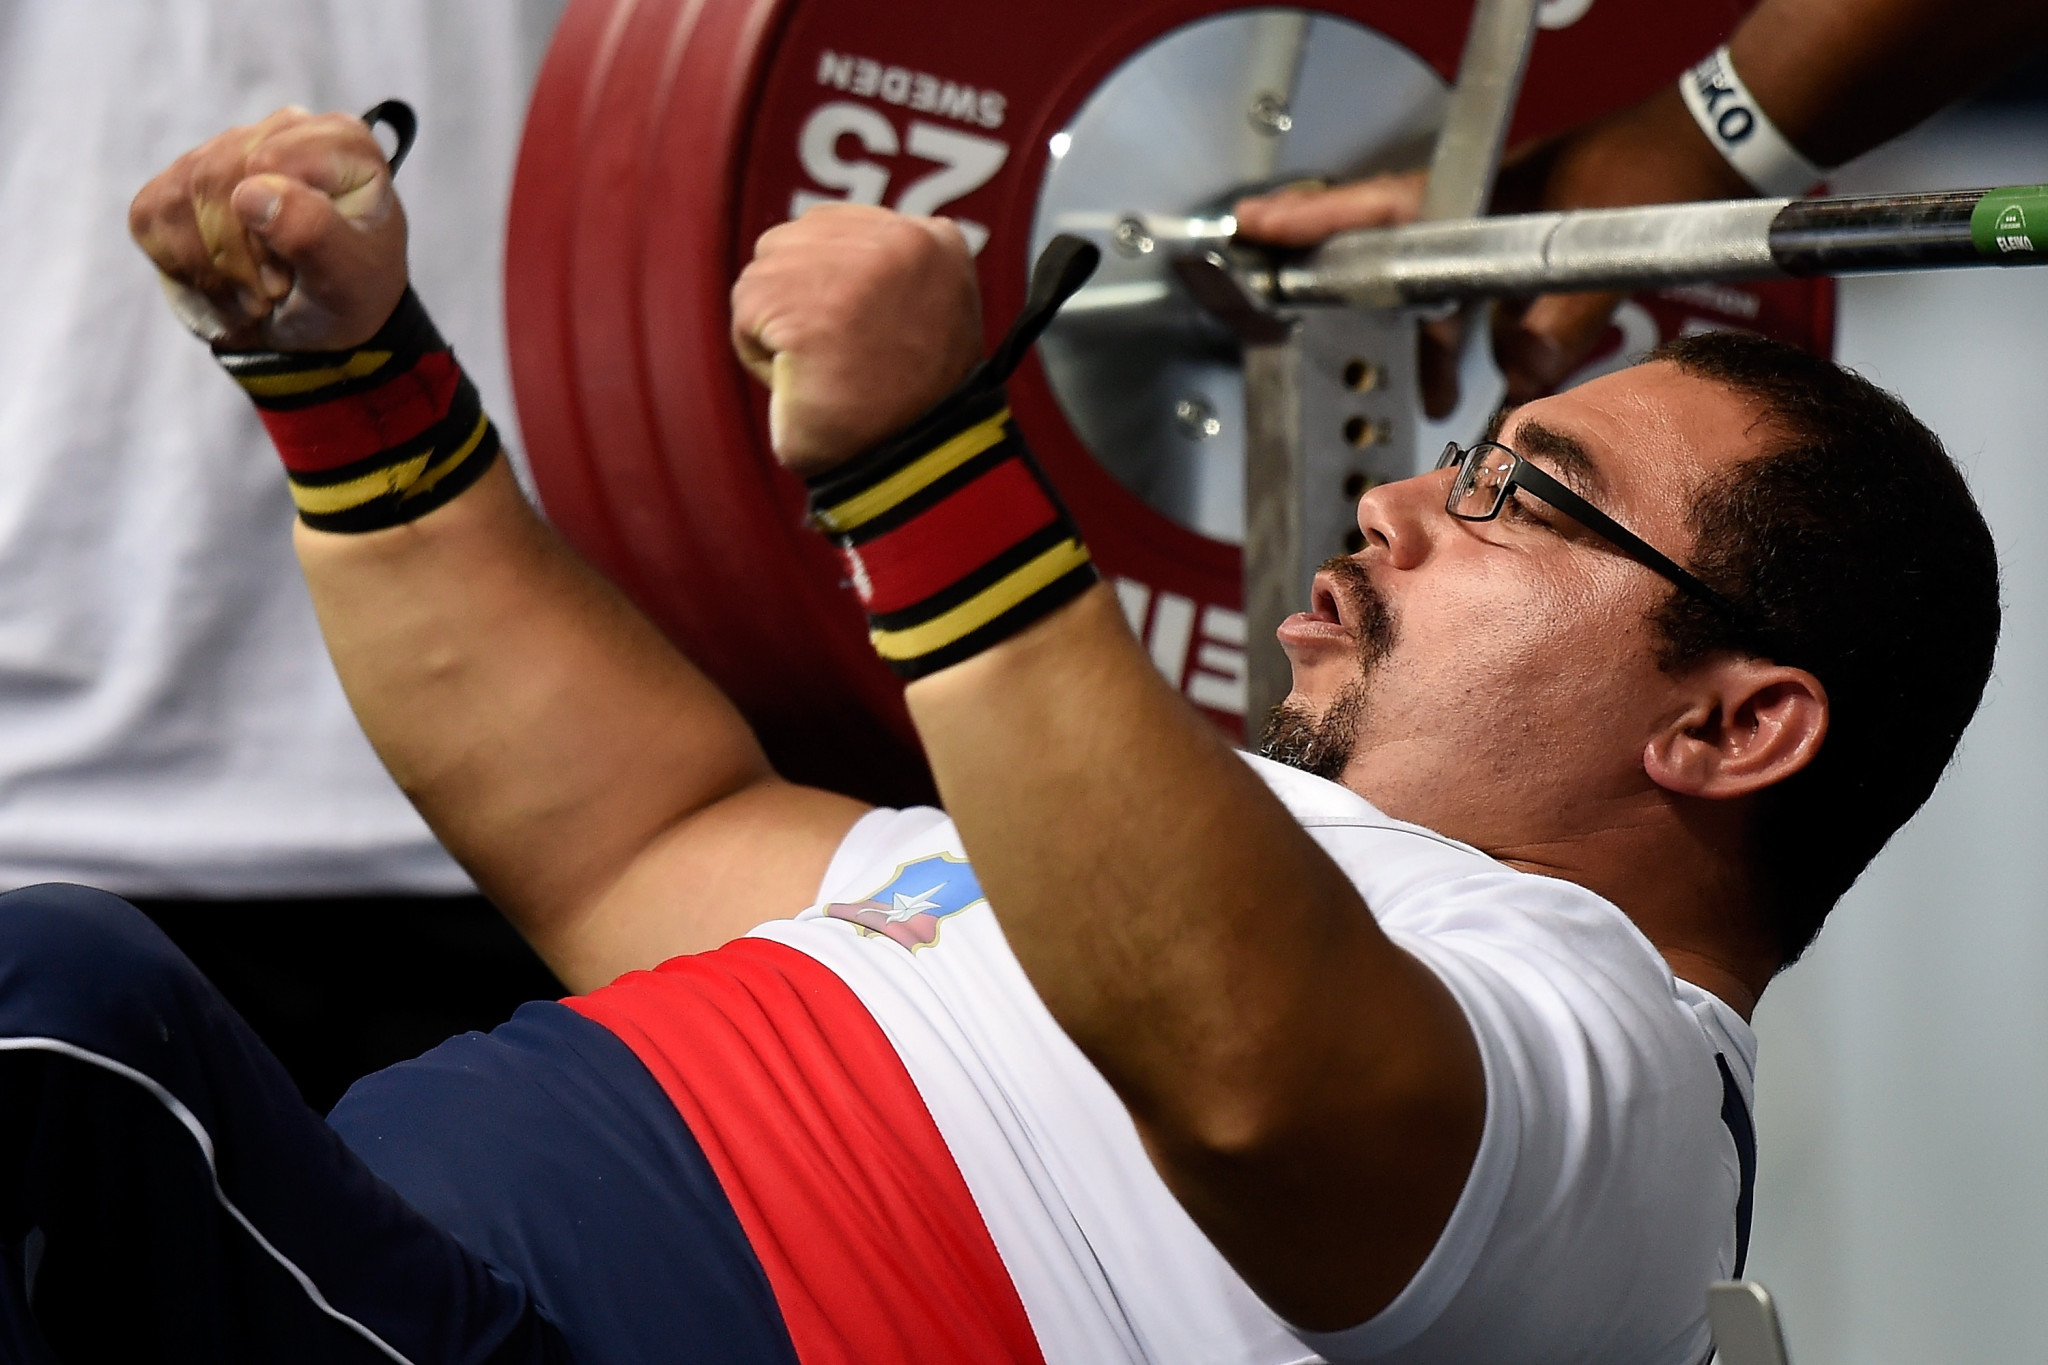 Chile end World Para Powerlifting Championships on high with mixed team gold